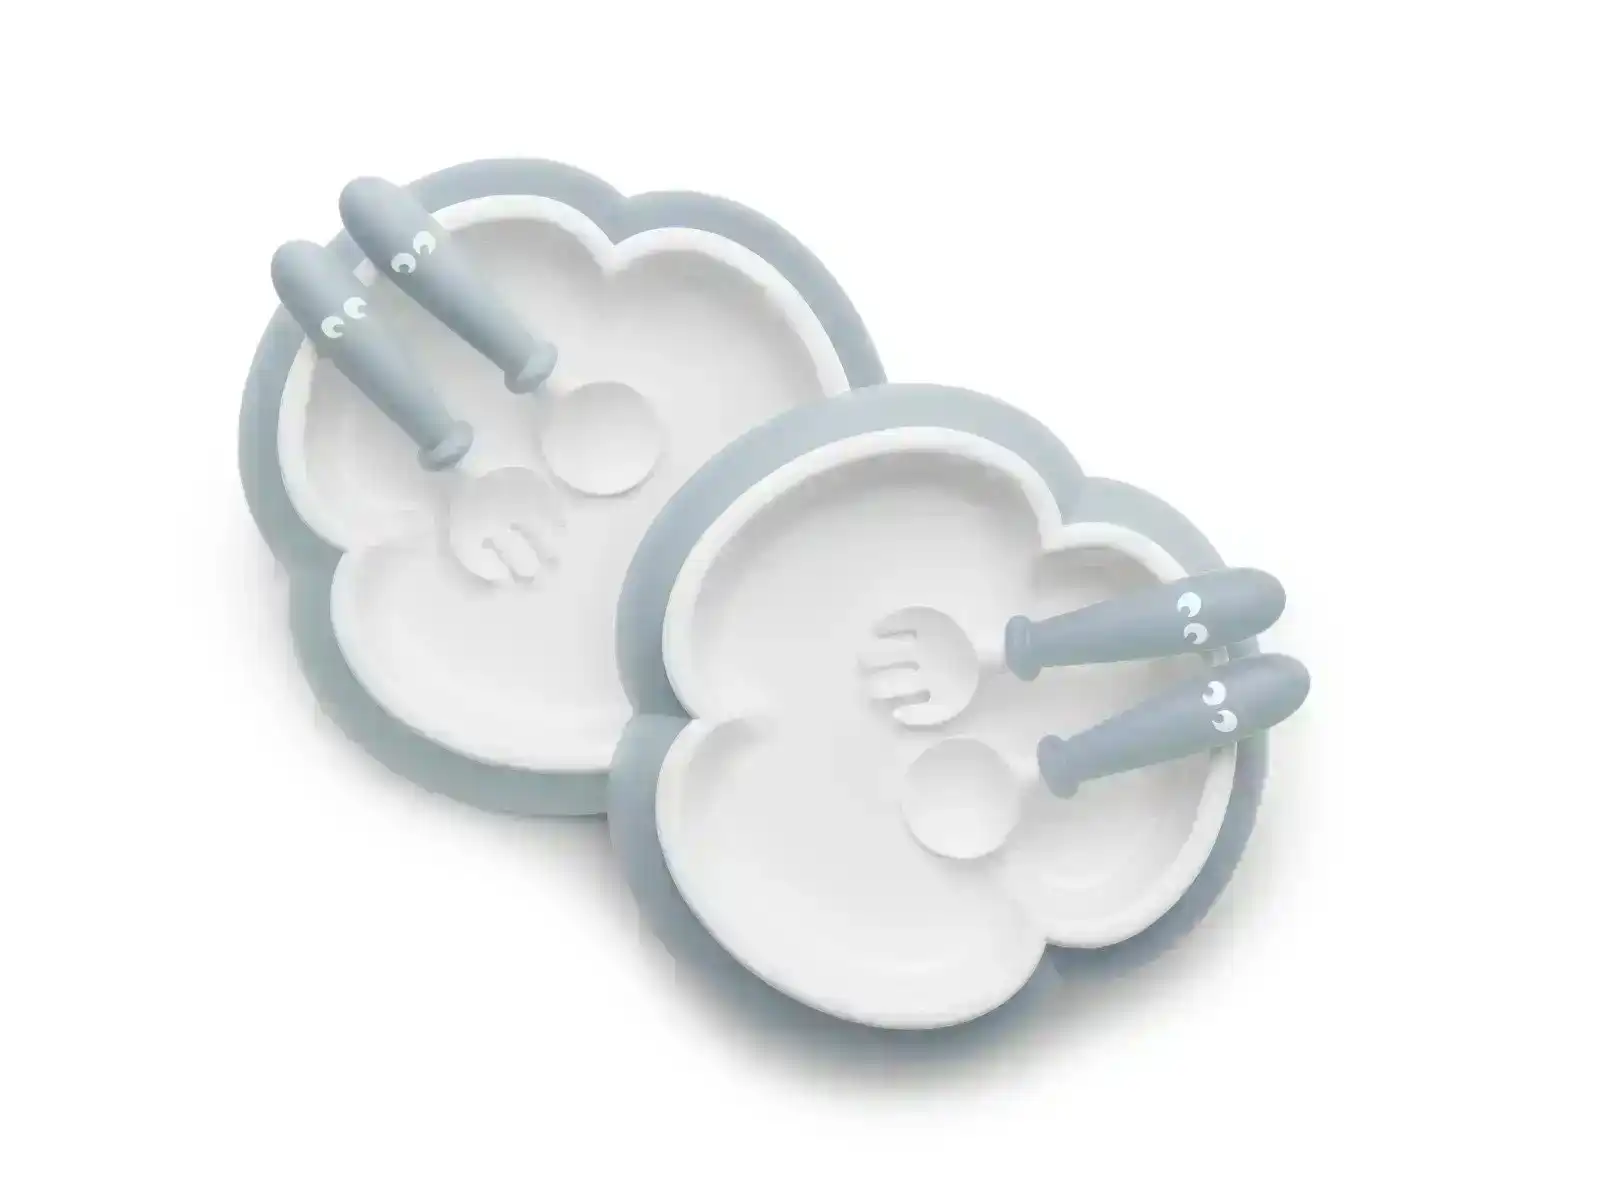 BabyBjorn Baby Plate - Spoon and Fork - Powder Blue 2-pack